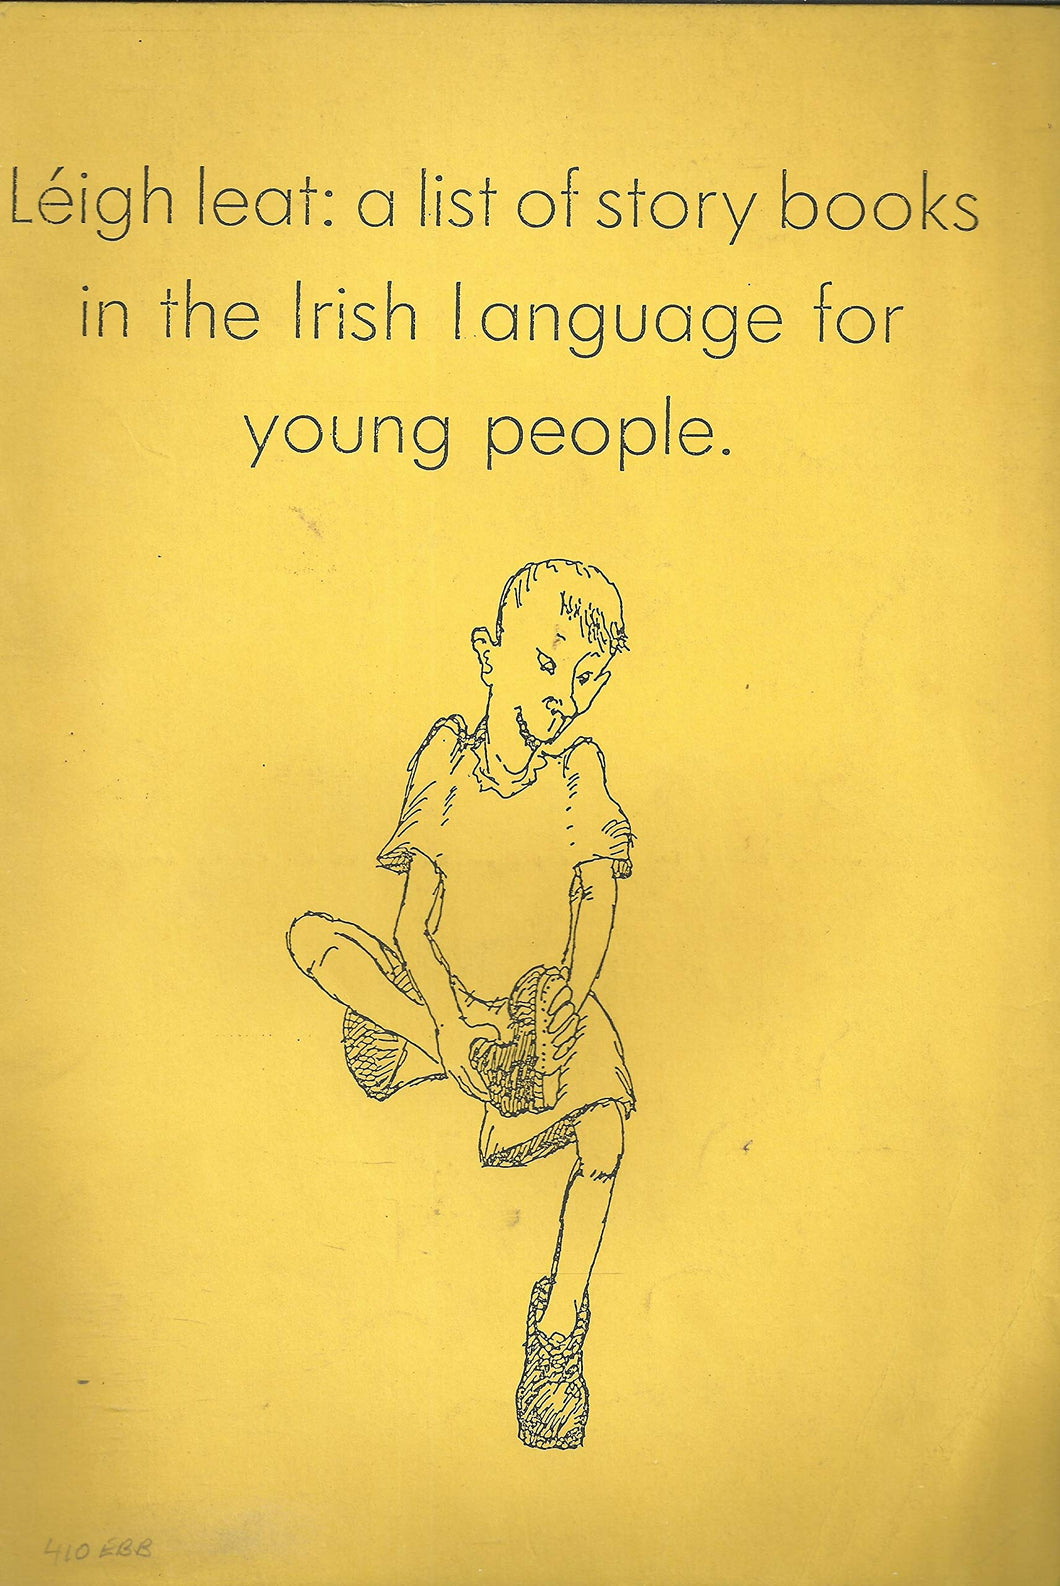 Léigh leat: A list of story books in the Irish language for young people